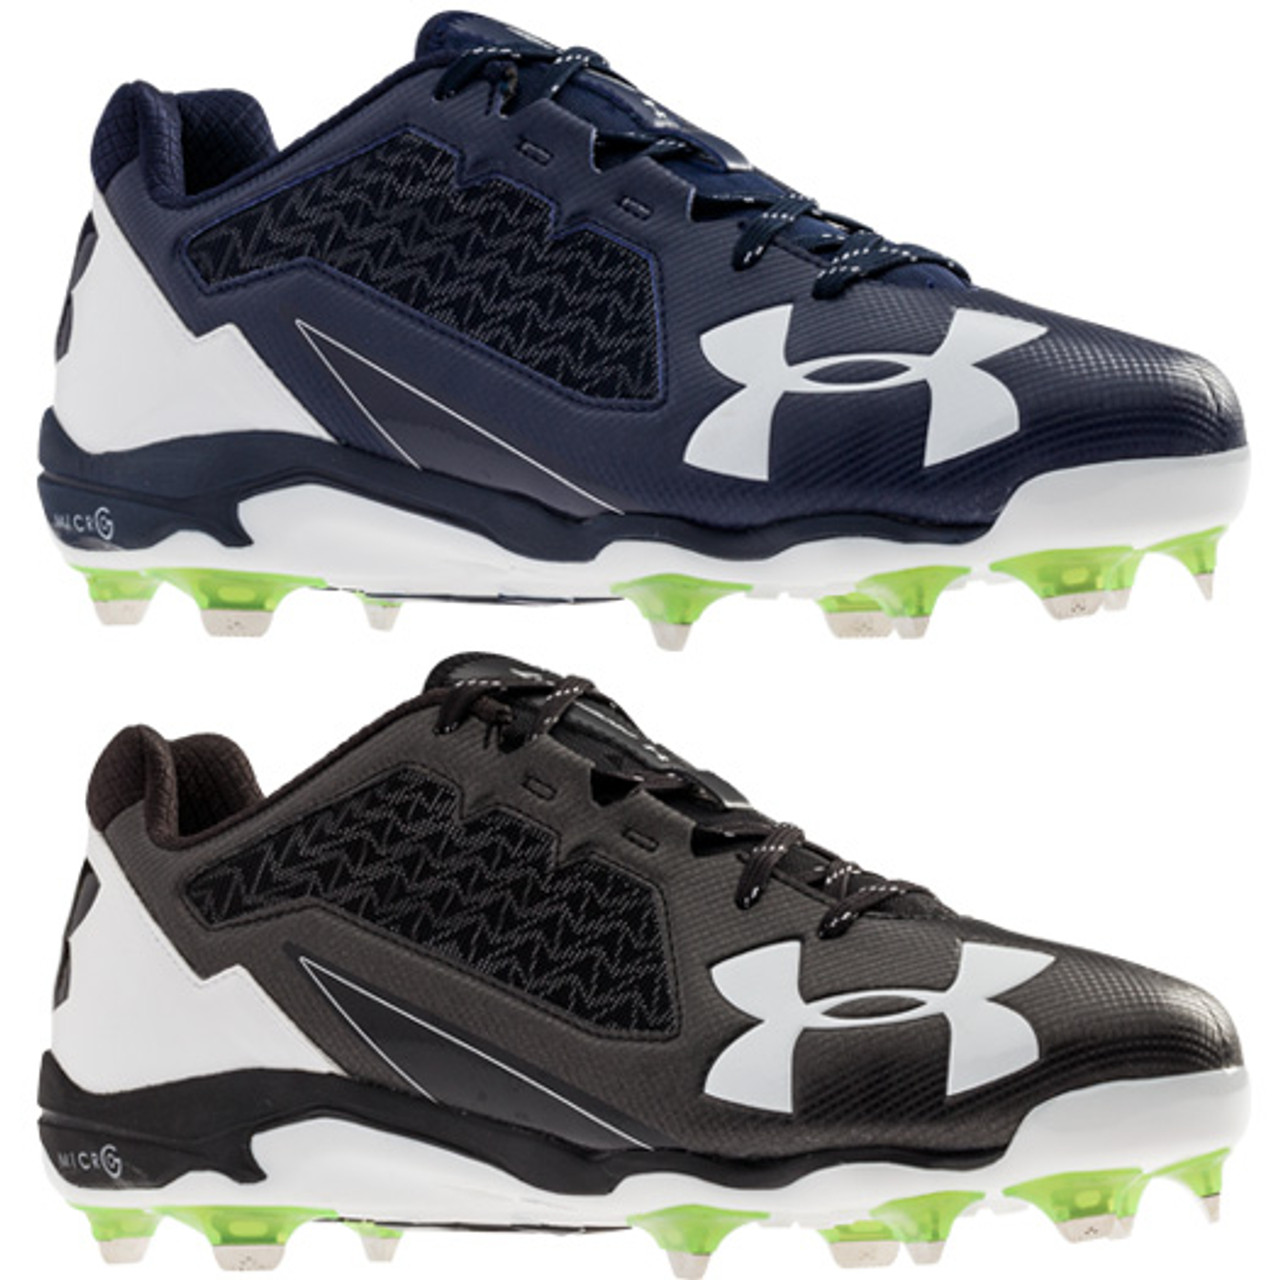 Under Armour Mens Deception Low DiamondTips Baseball Cleat White//Black Size